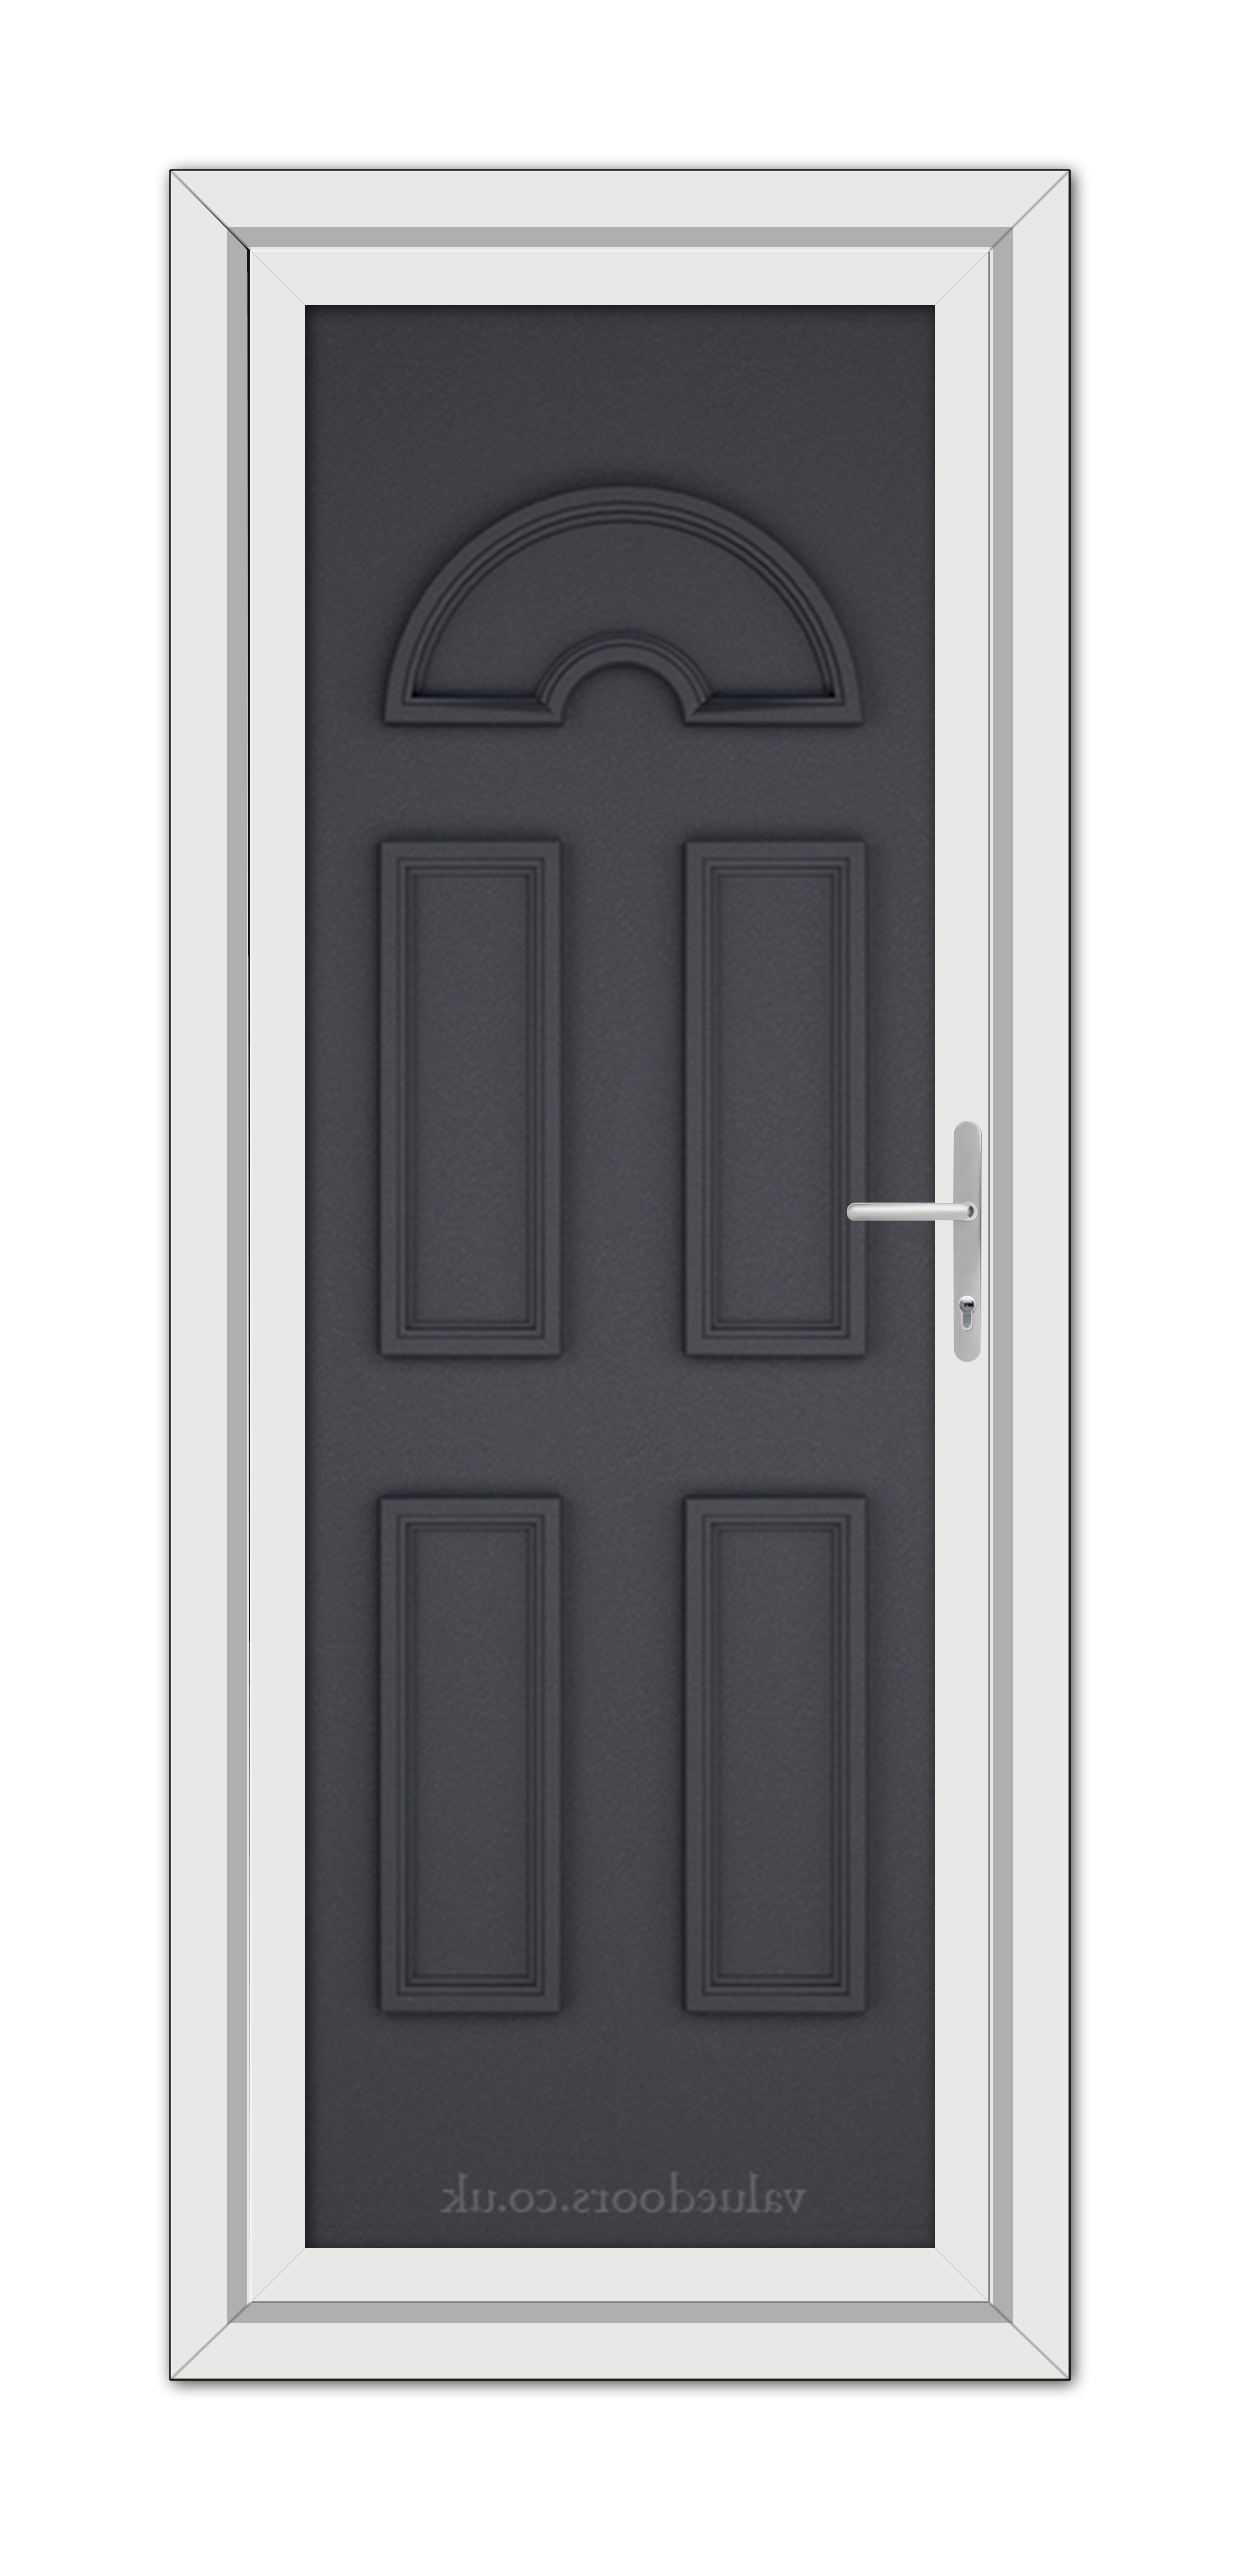 Front view of a Grey Grained Sandringham Solid uPVC Door with six panels and a silver handle, set within a white frame.